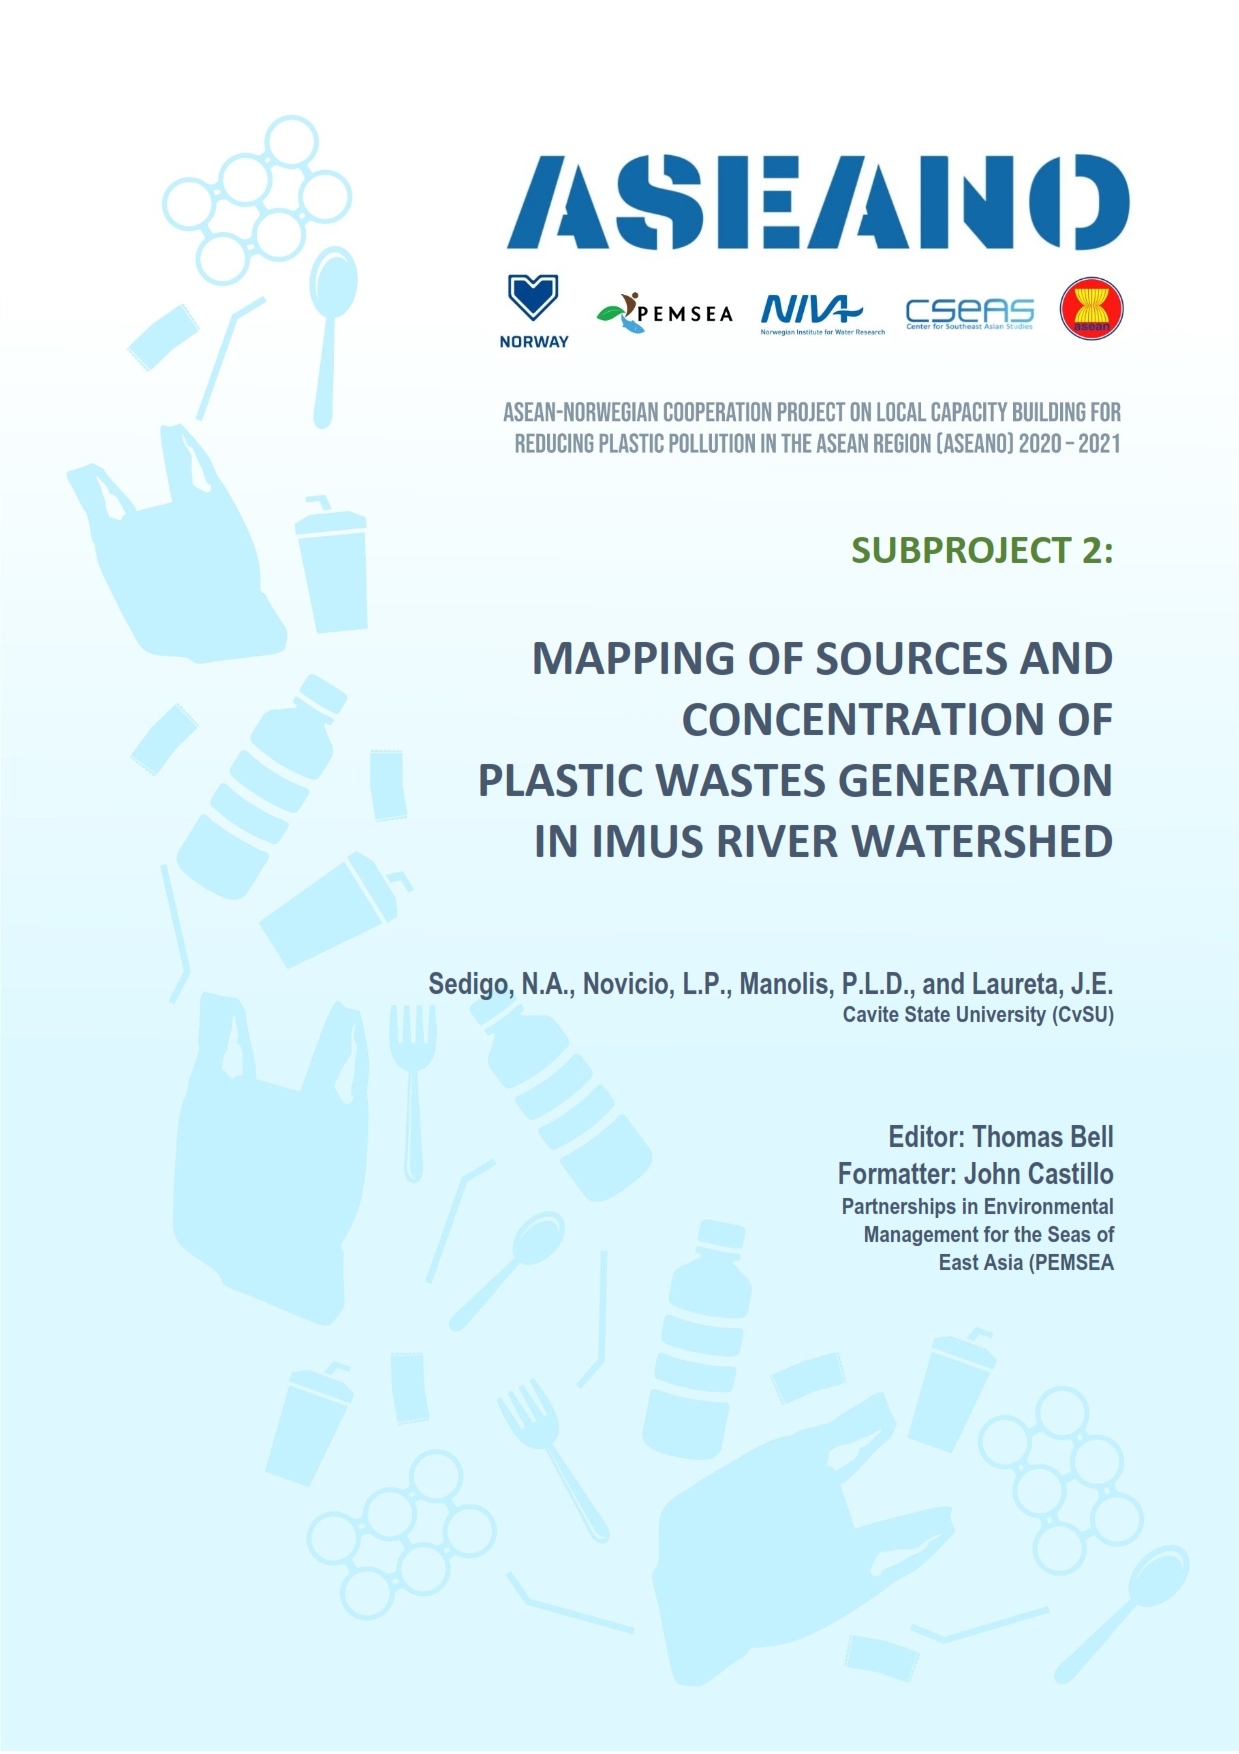 ASEANO Project Report: Mapping of Sources and Concentration of Plastic Waste in the Imus River Watershed